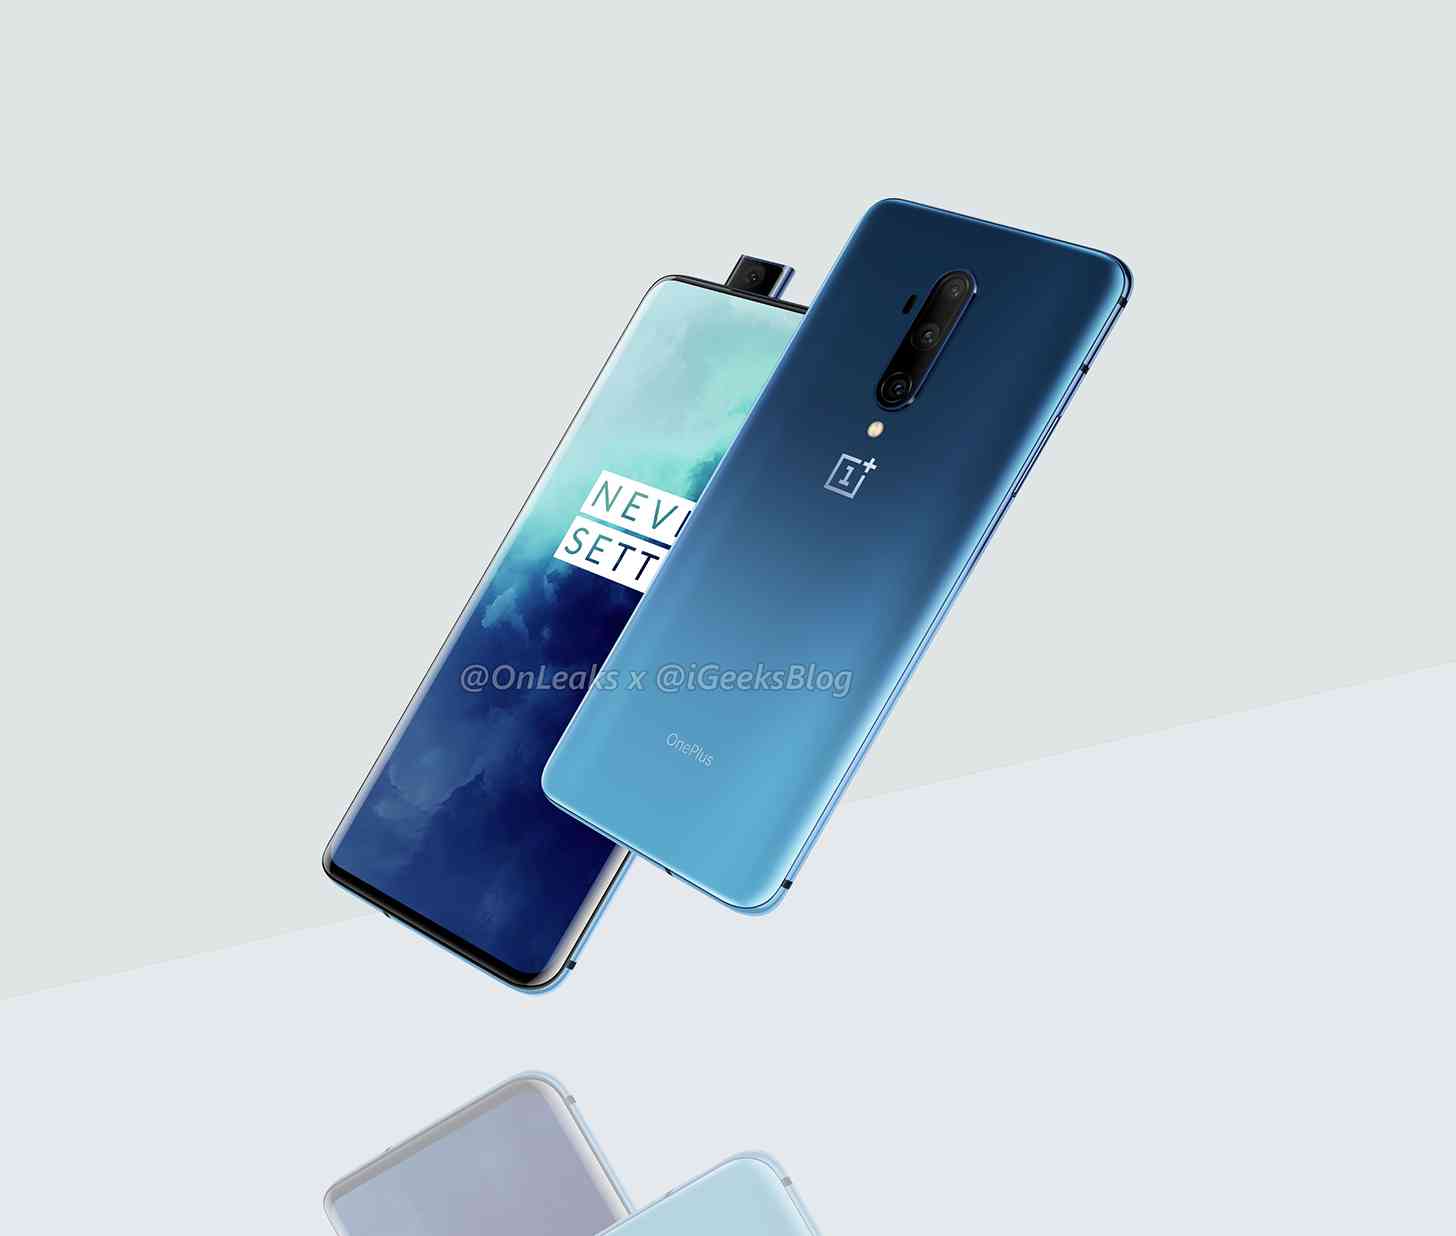 OnePlus 7T Pro official image leak